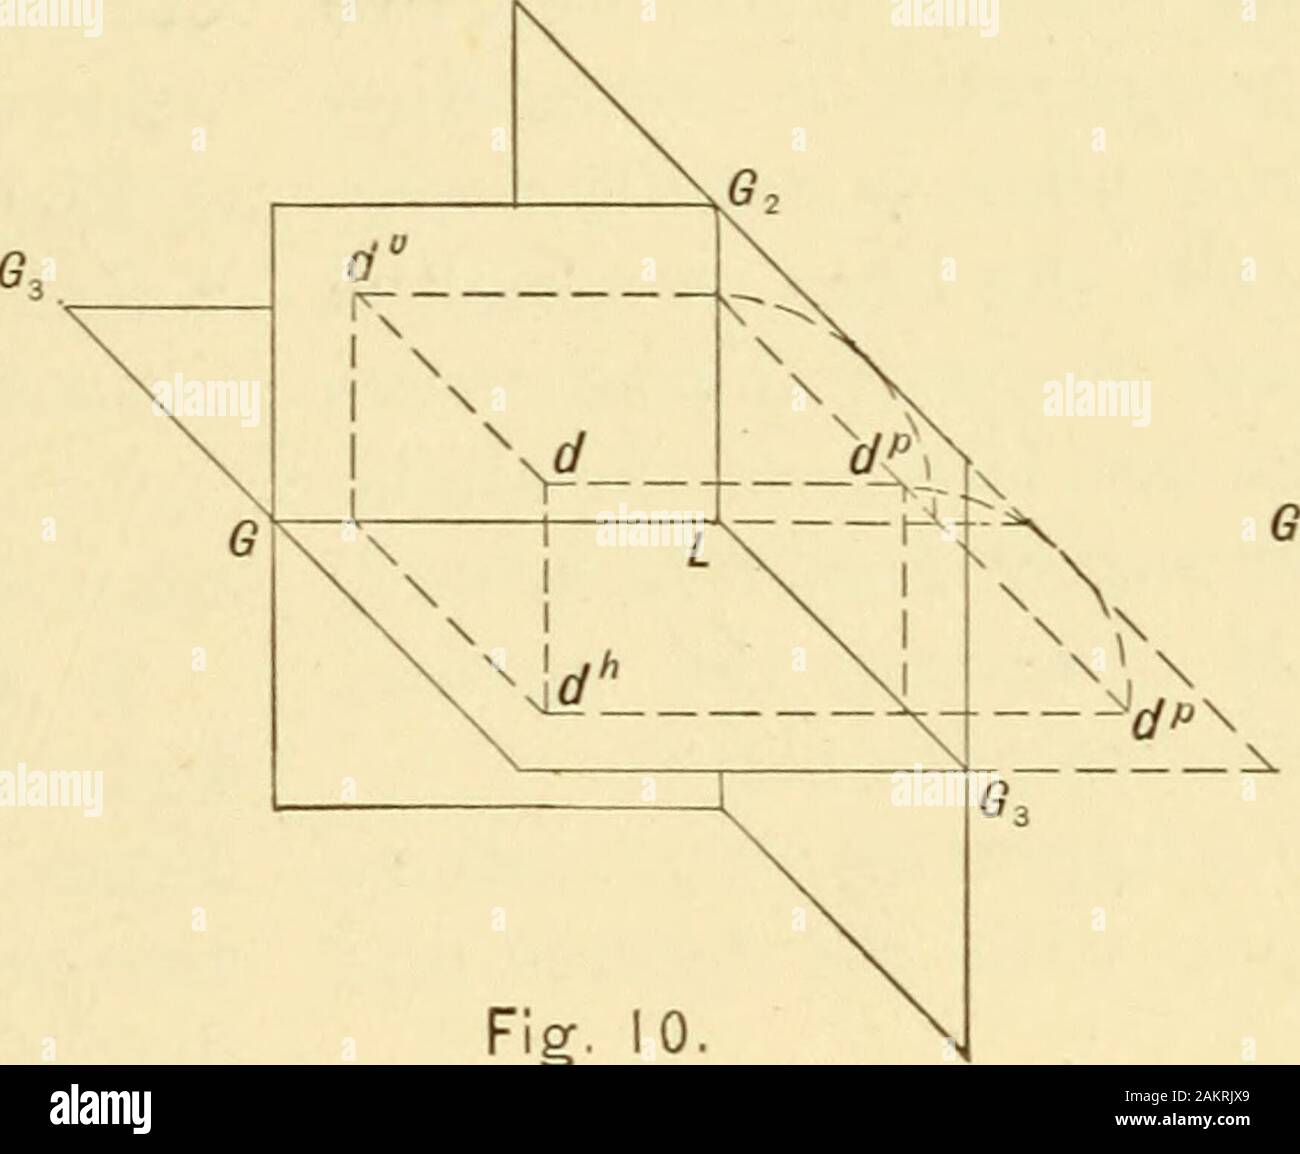 Descriptive Geometry J G R Fig 9 X A V And H Cjh Fig 6 C 6 D Orthographic Project On Fig 7 Ct 1 R D Fig